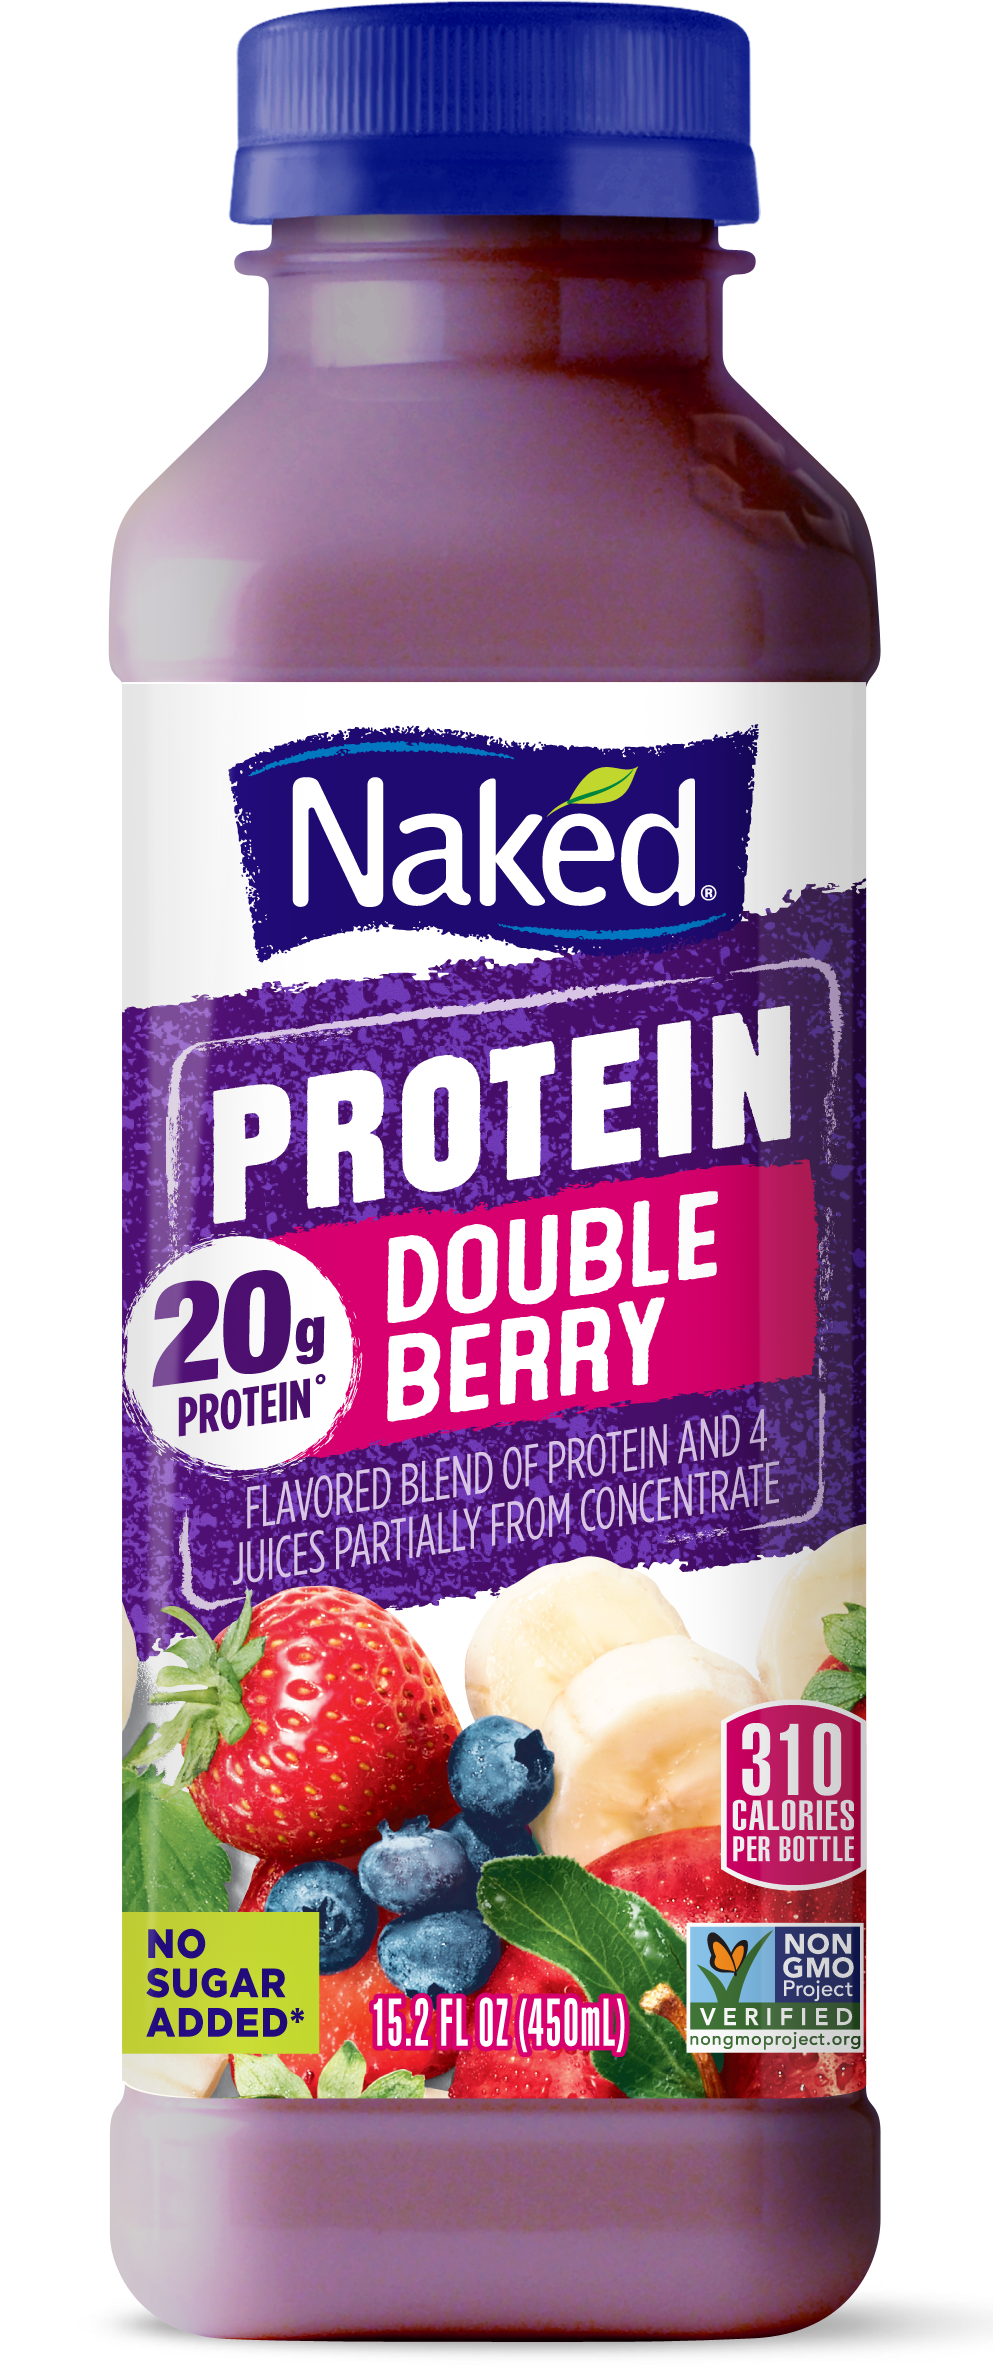 Double Berry Product Image